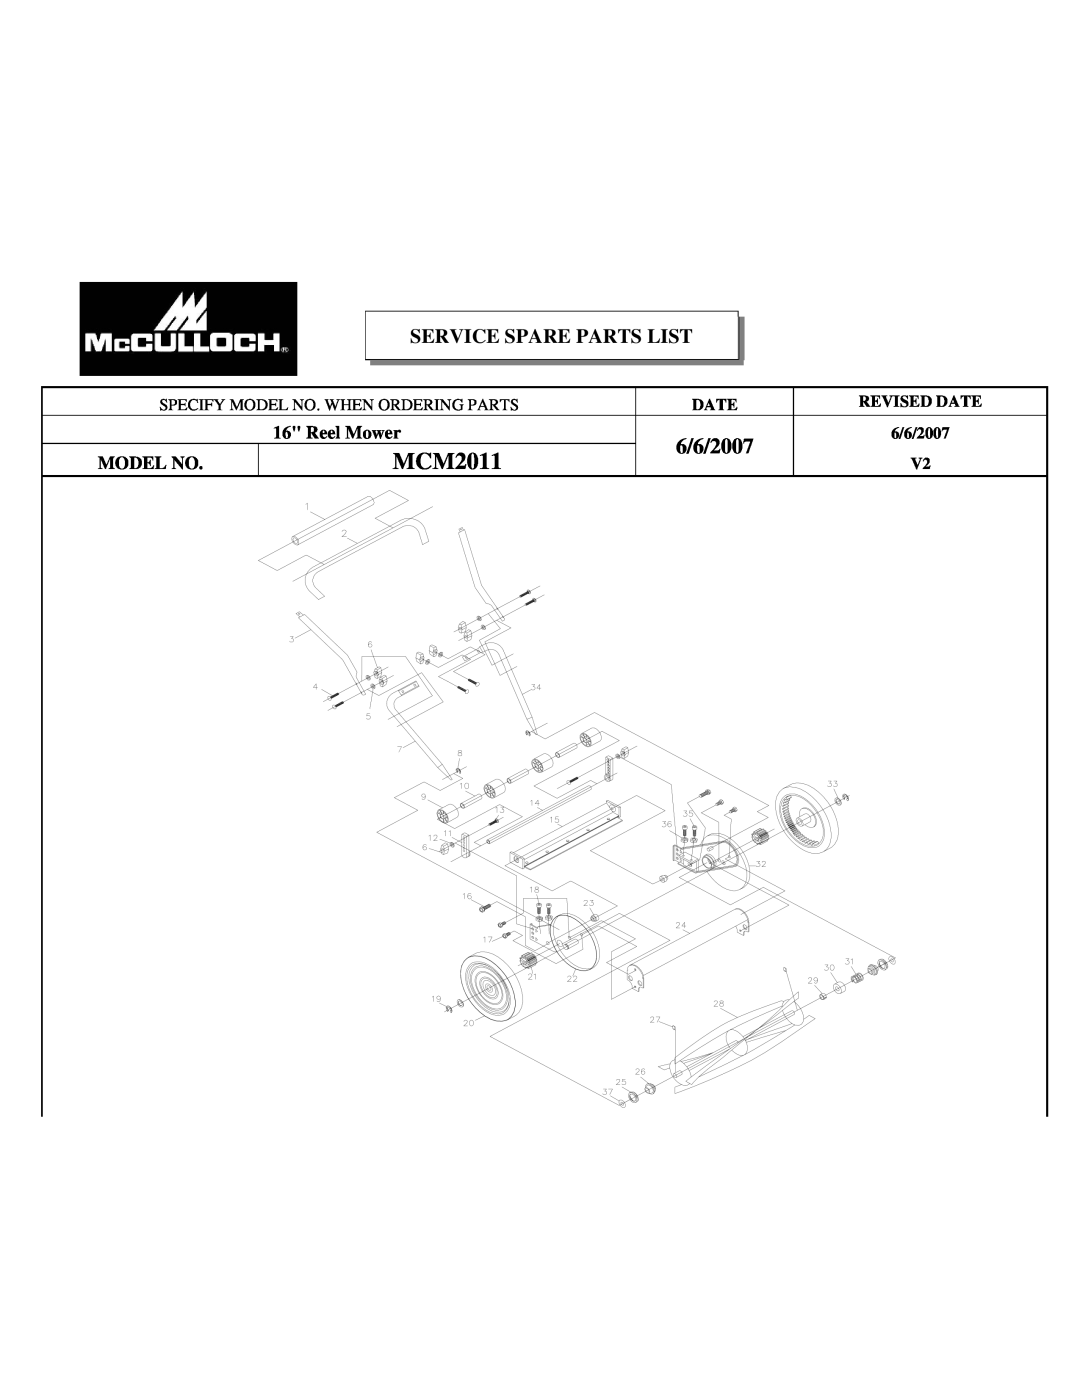 McCulloch MCM2011 manual 6/6/2007, Service Spare Parts List, Specify Model No. When Ordering Parts, Revised Date 